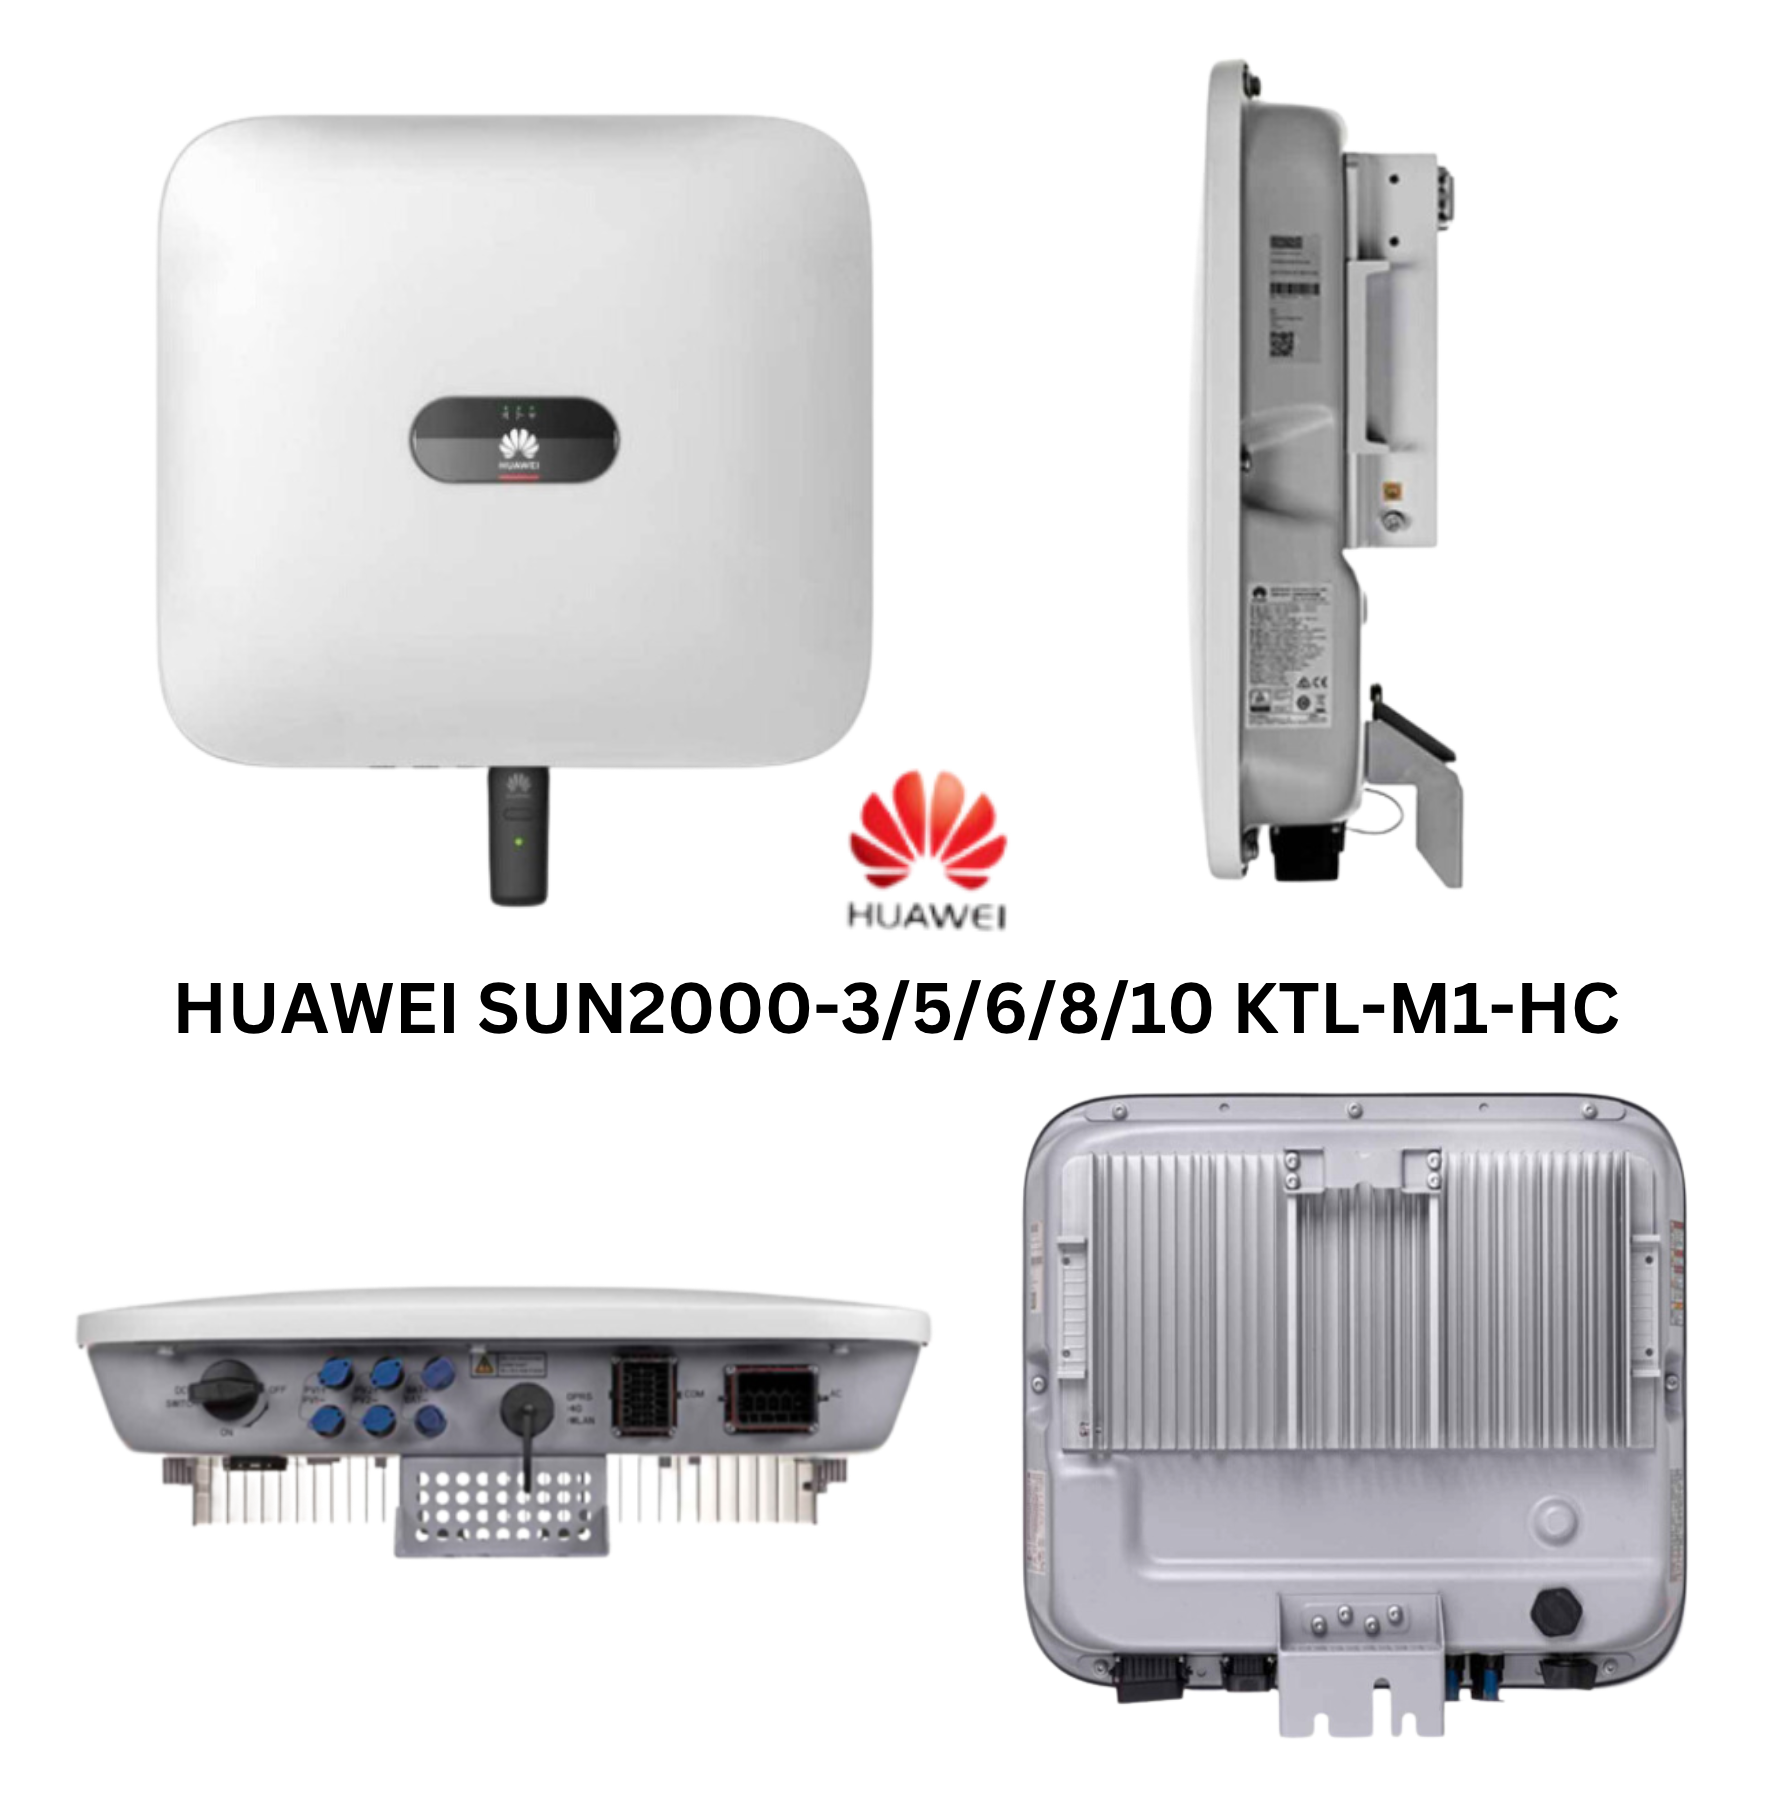 Huawei Ensemble Photovoltaïque Complet - [5kW + 15kWh]